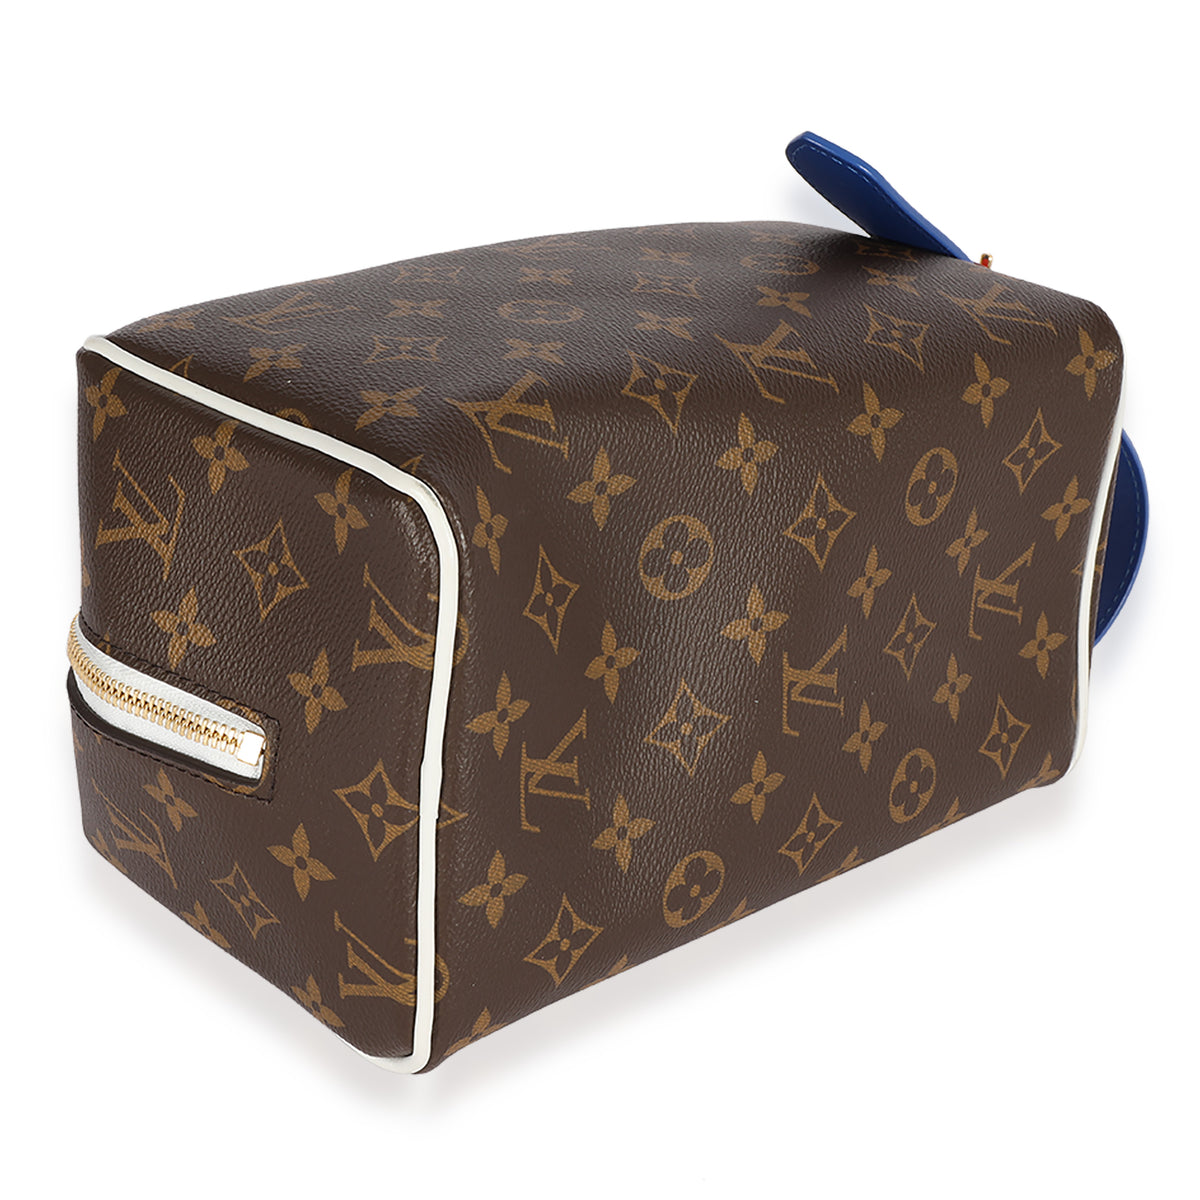 Louis Vuitton x NBA Dopp Kit Blue in Coated Canvas/Leather with